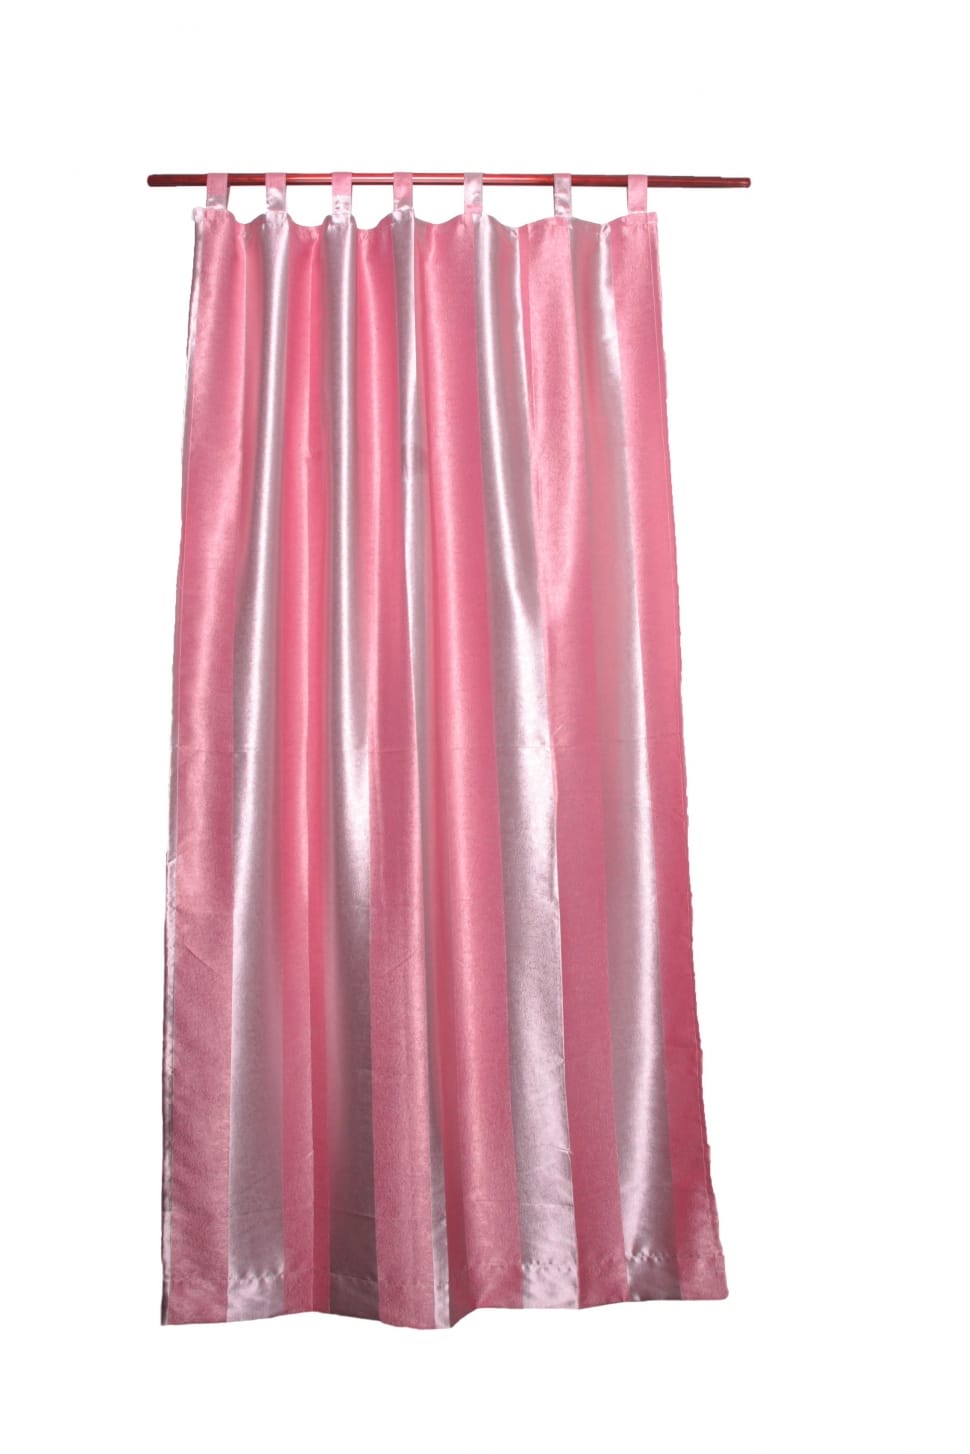 pink satin window curtain preview